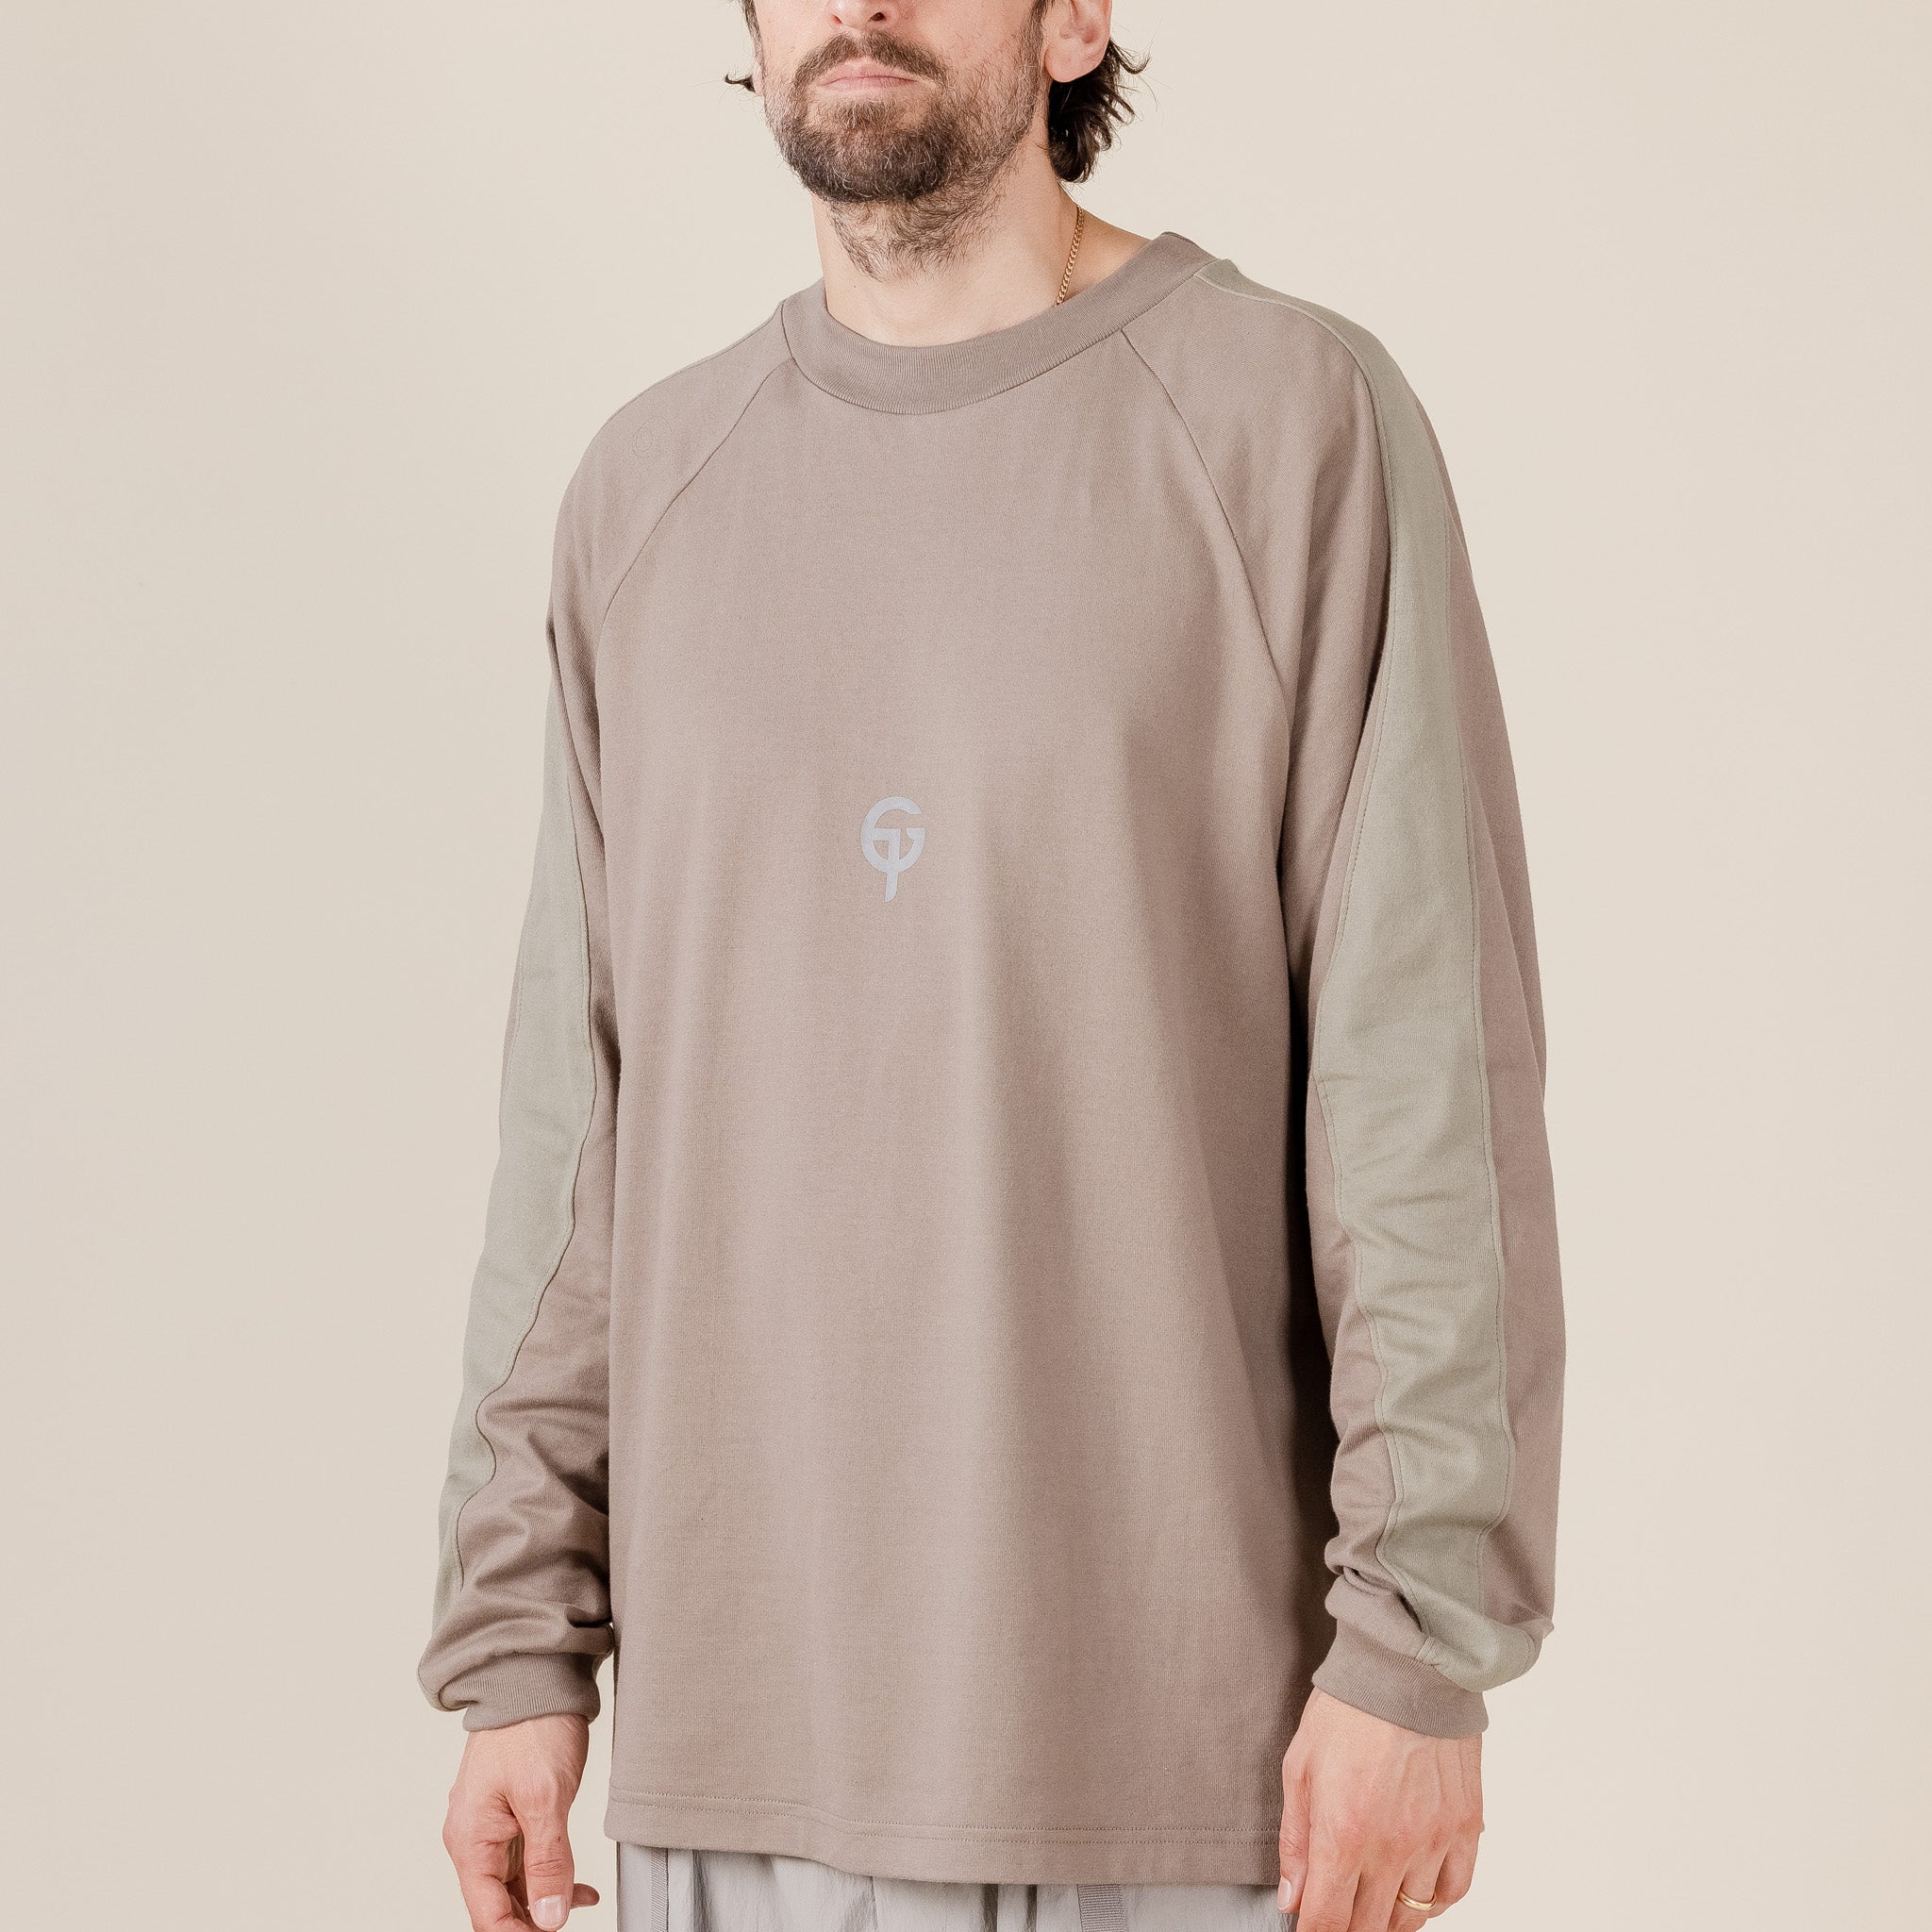 GOOPiMADE x TTOO - “Gof-T1” Binary Graphic L/S Tee - Apricot "goopimade this thing of ours" "goopimade TTOO collaboration"